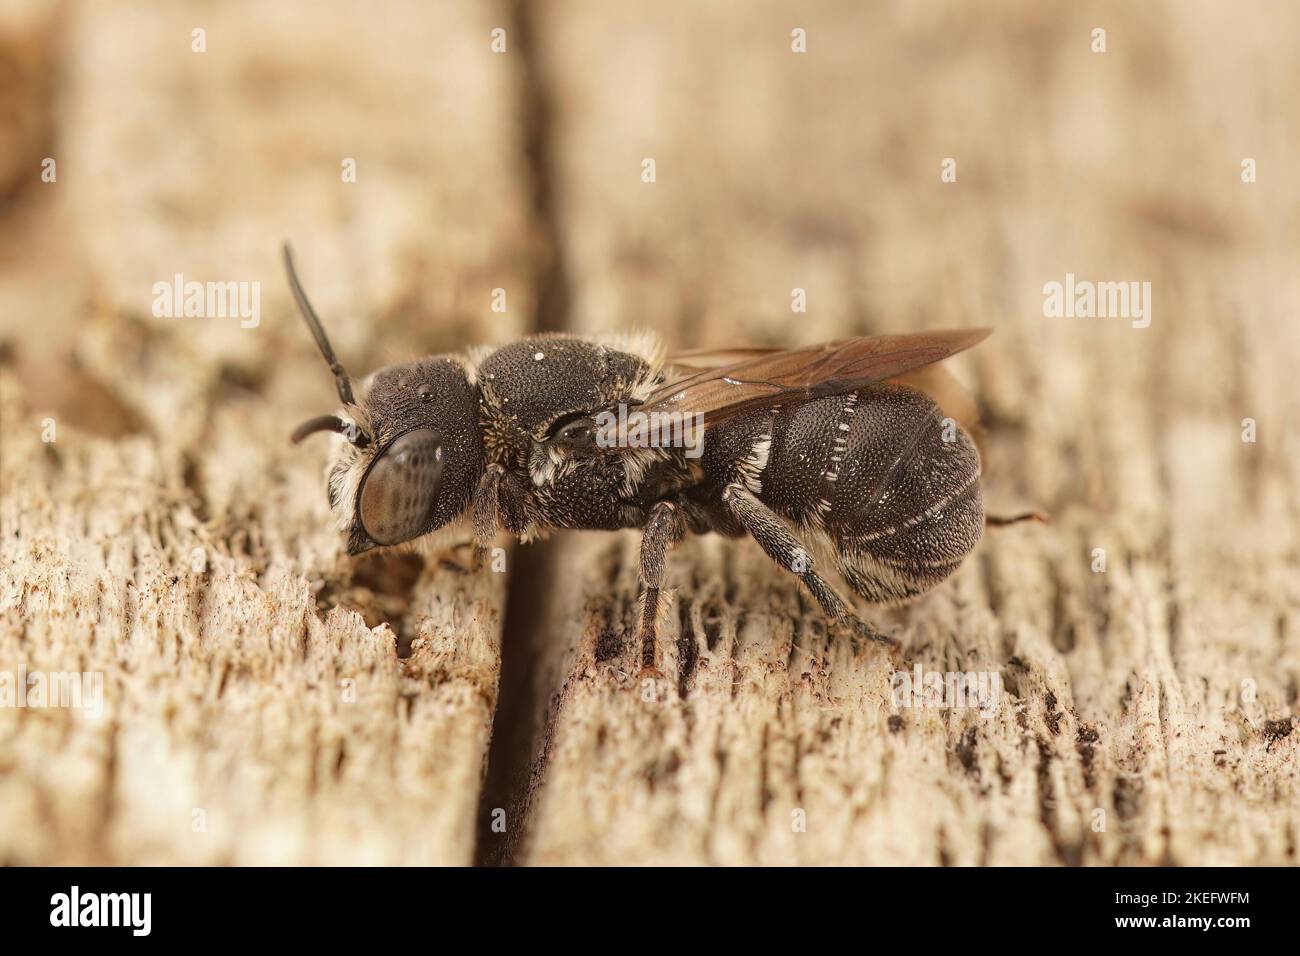 A macro shot of a Heriades crenulata solitary bee on a wooden surface Stock Photo